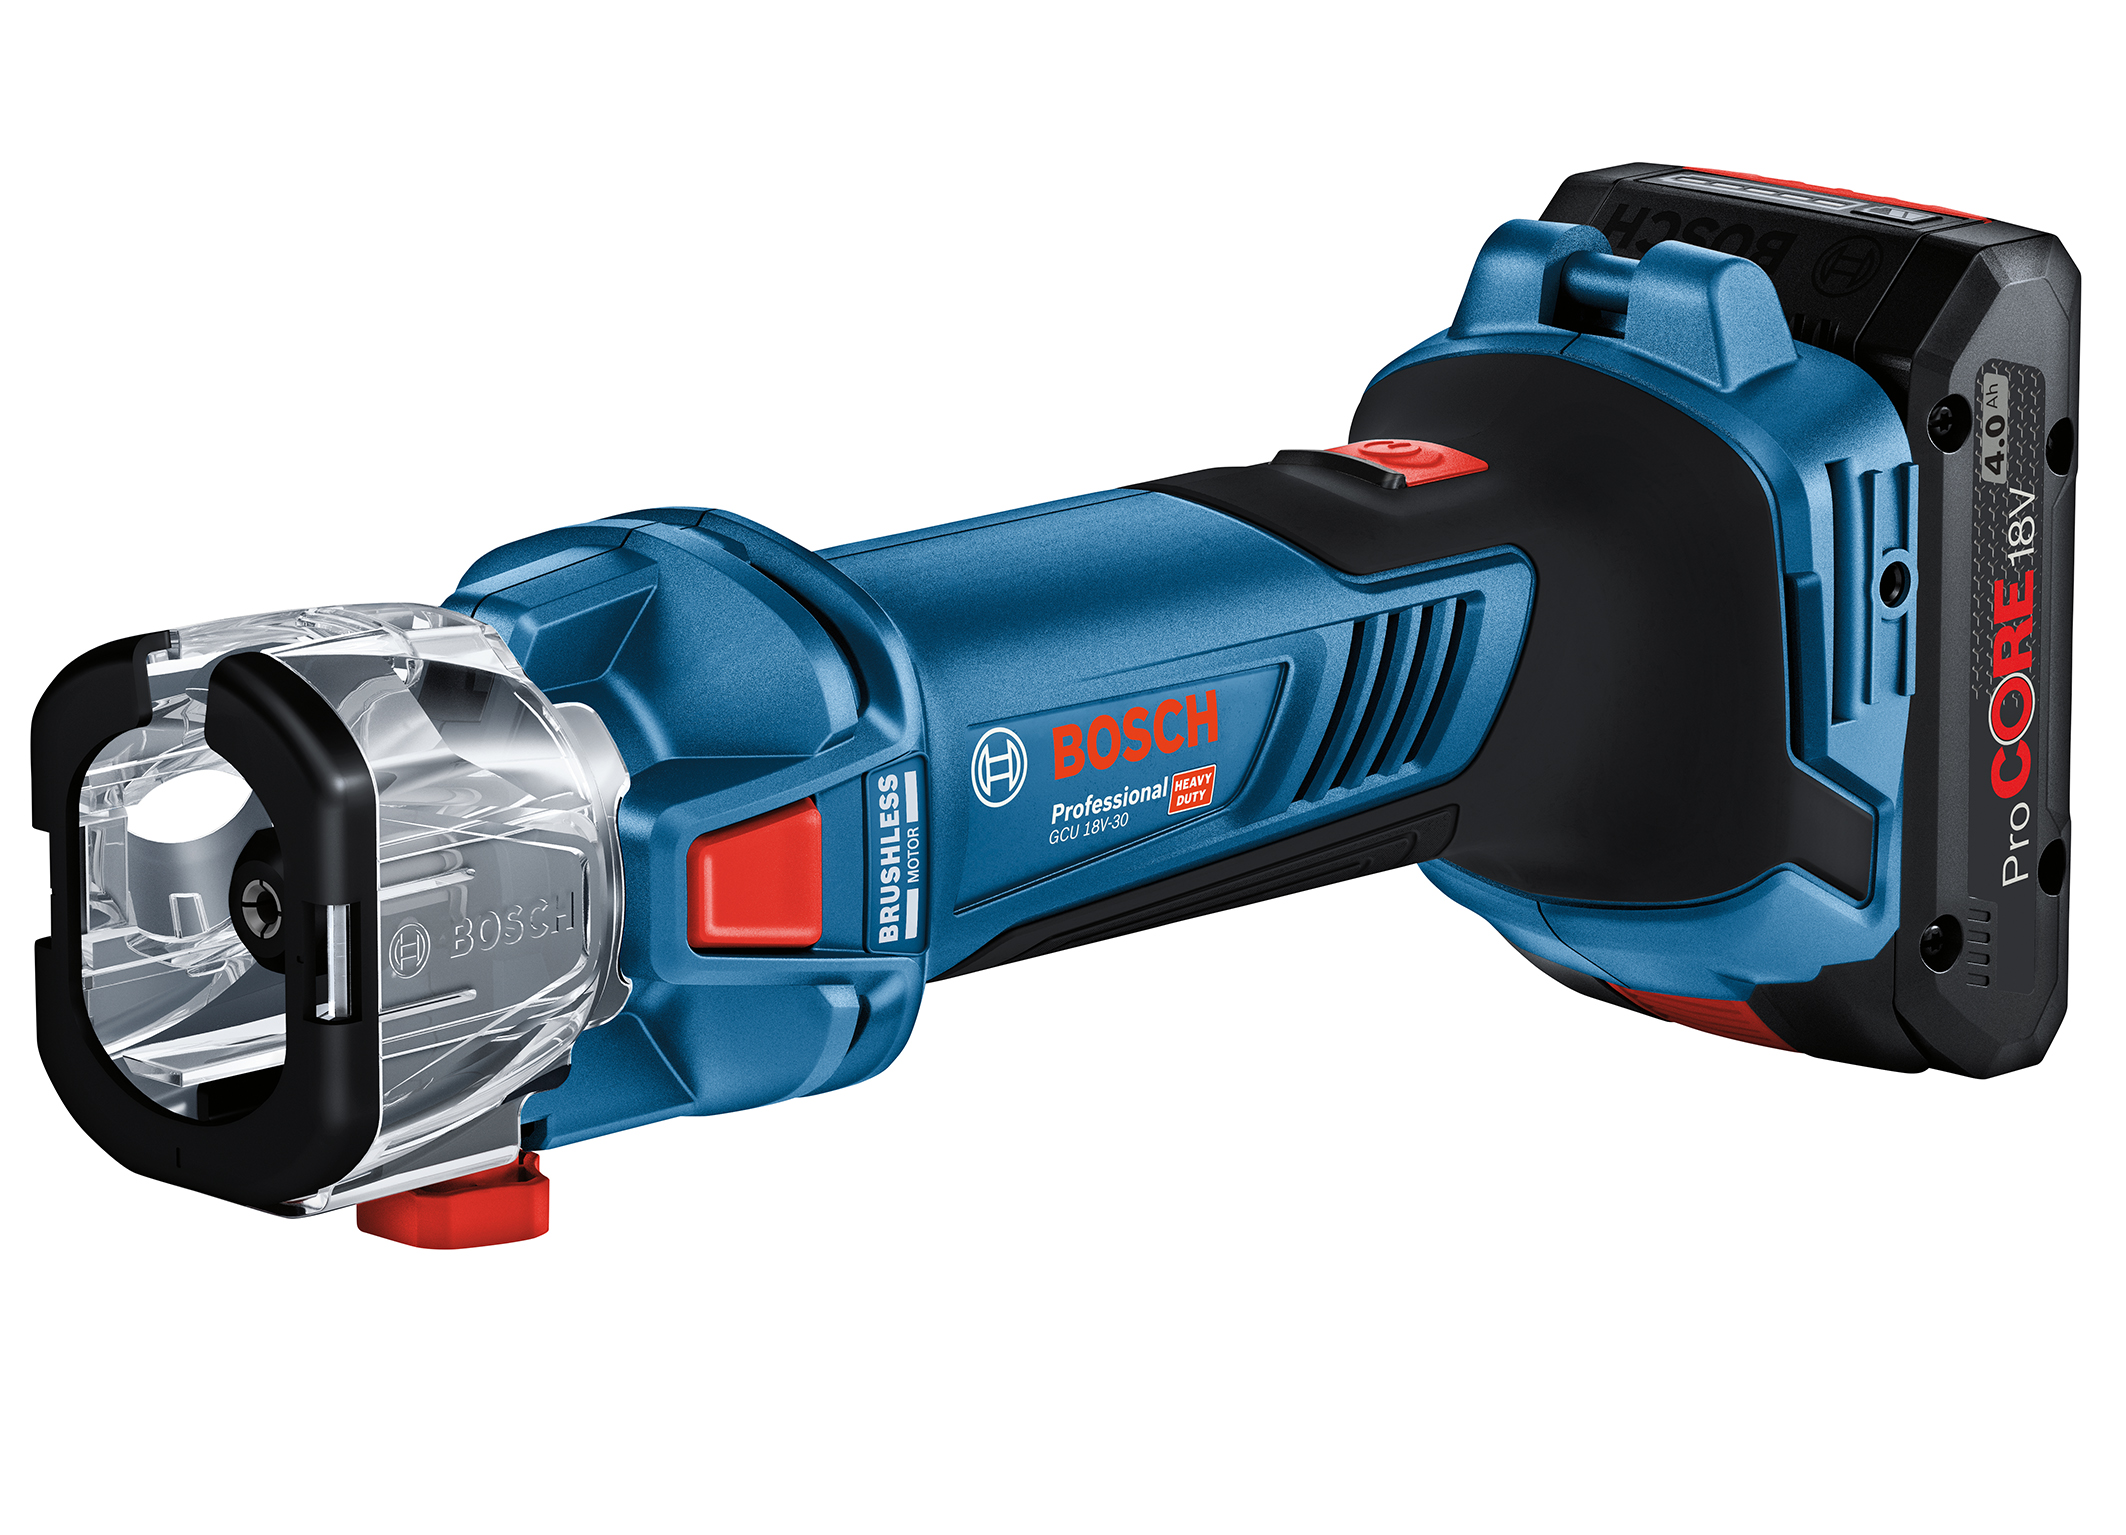 New in the 'Professional 18V System': GCU 18V-30 Professional